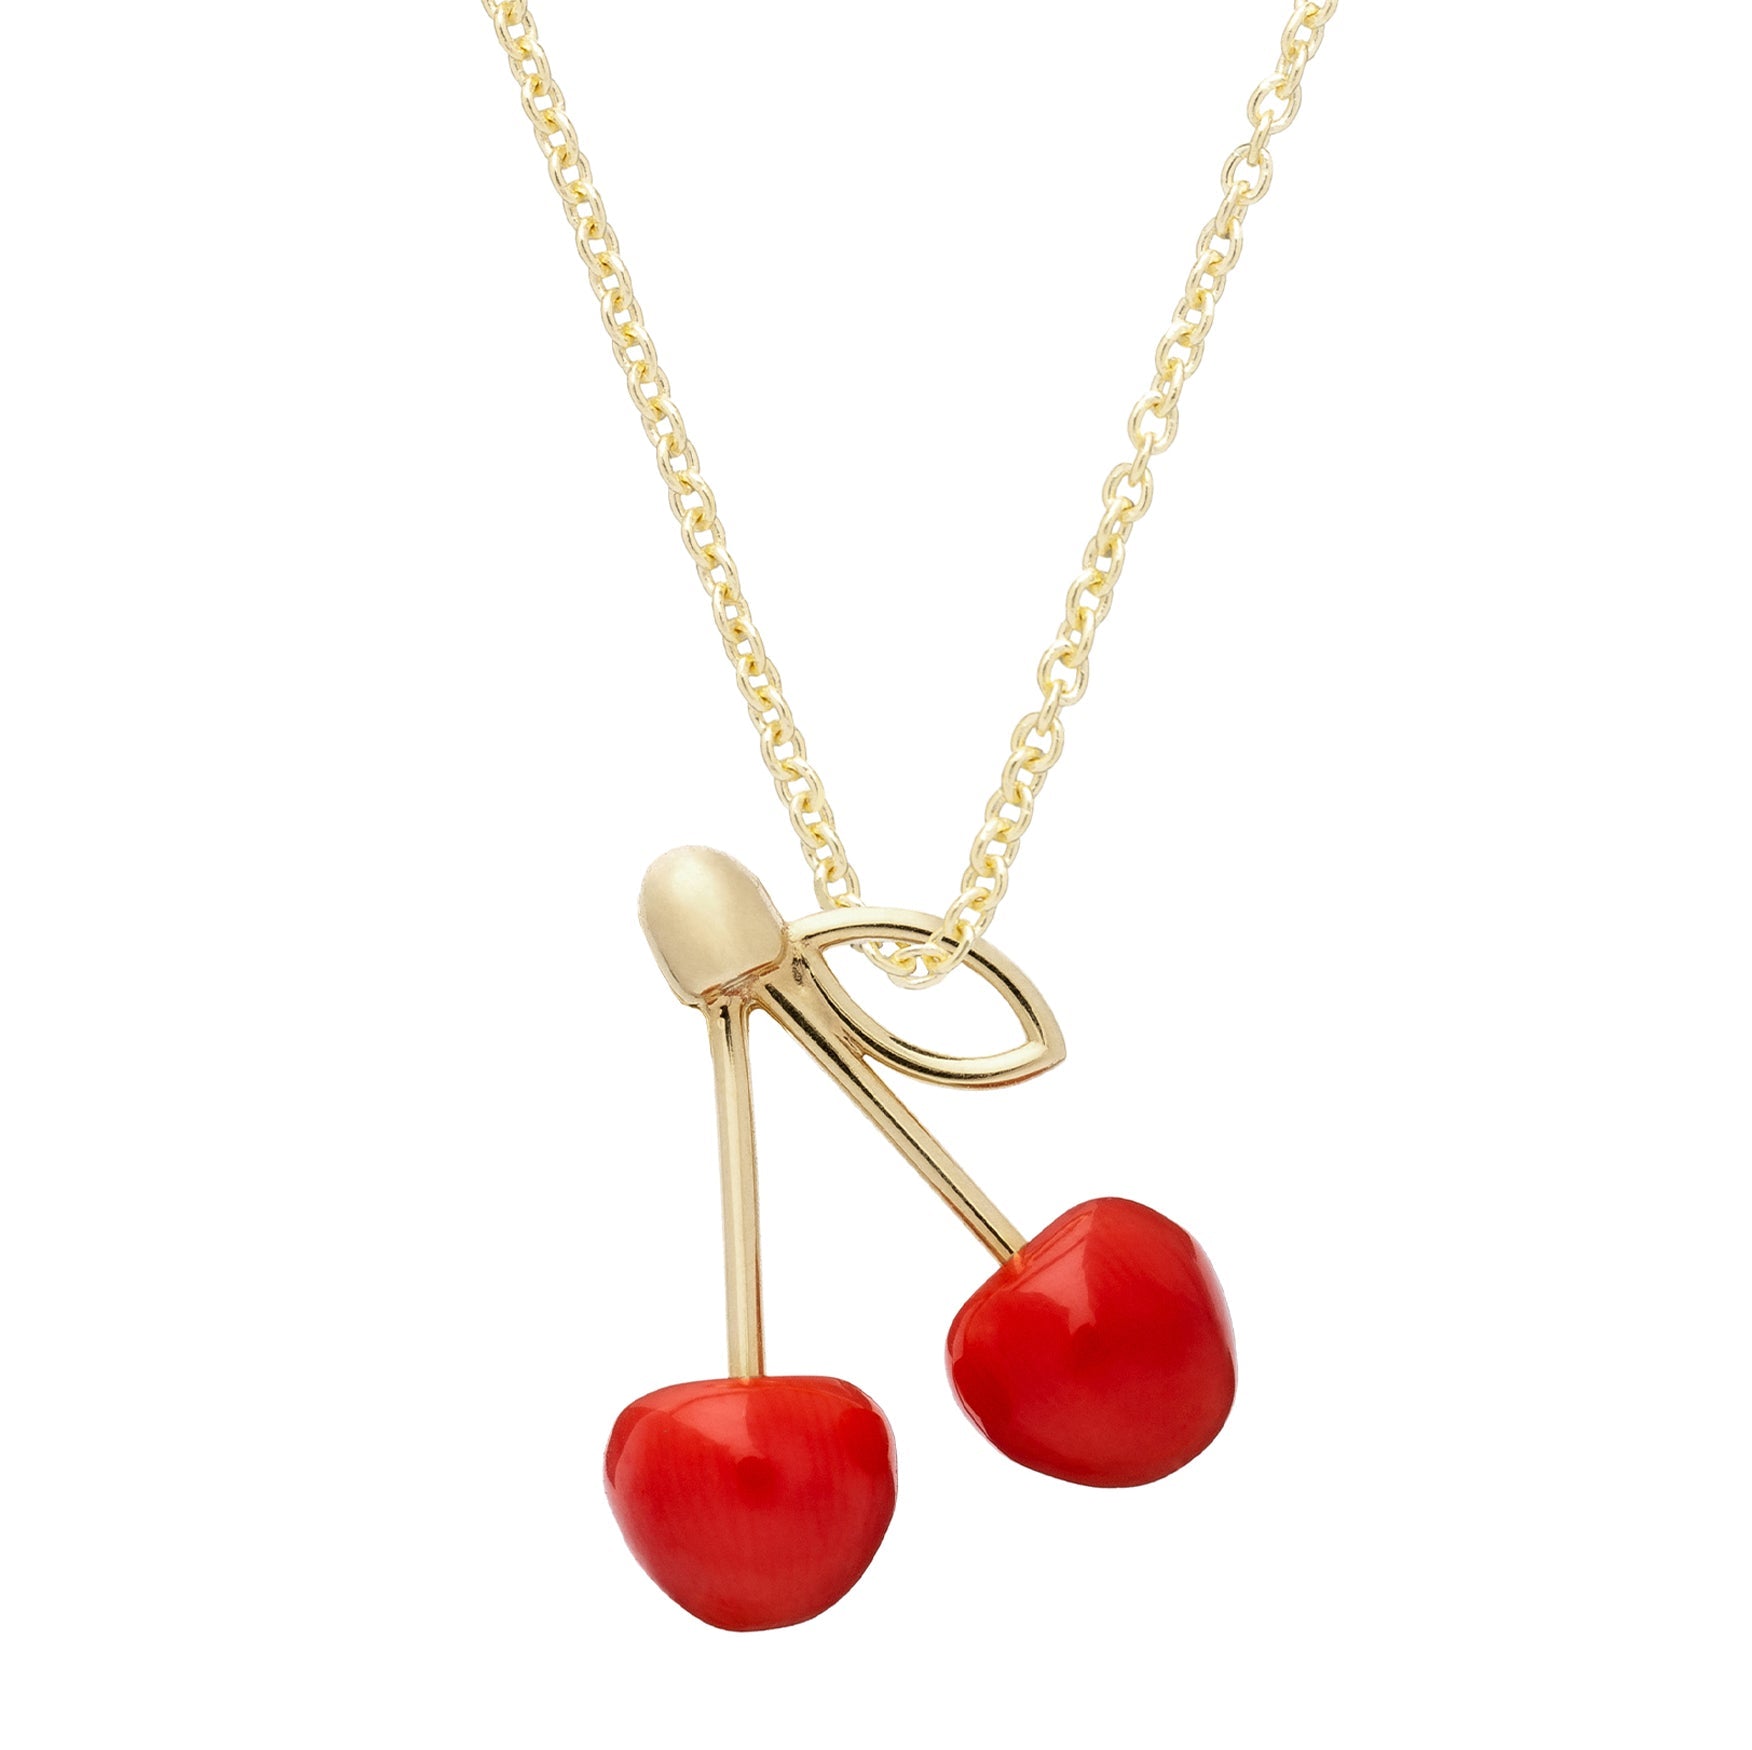 Gold chain necklace with two cherries in red coral